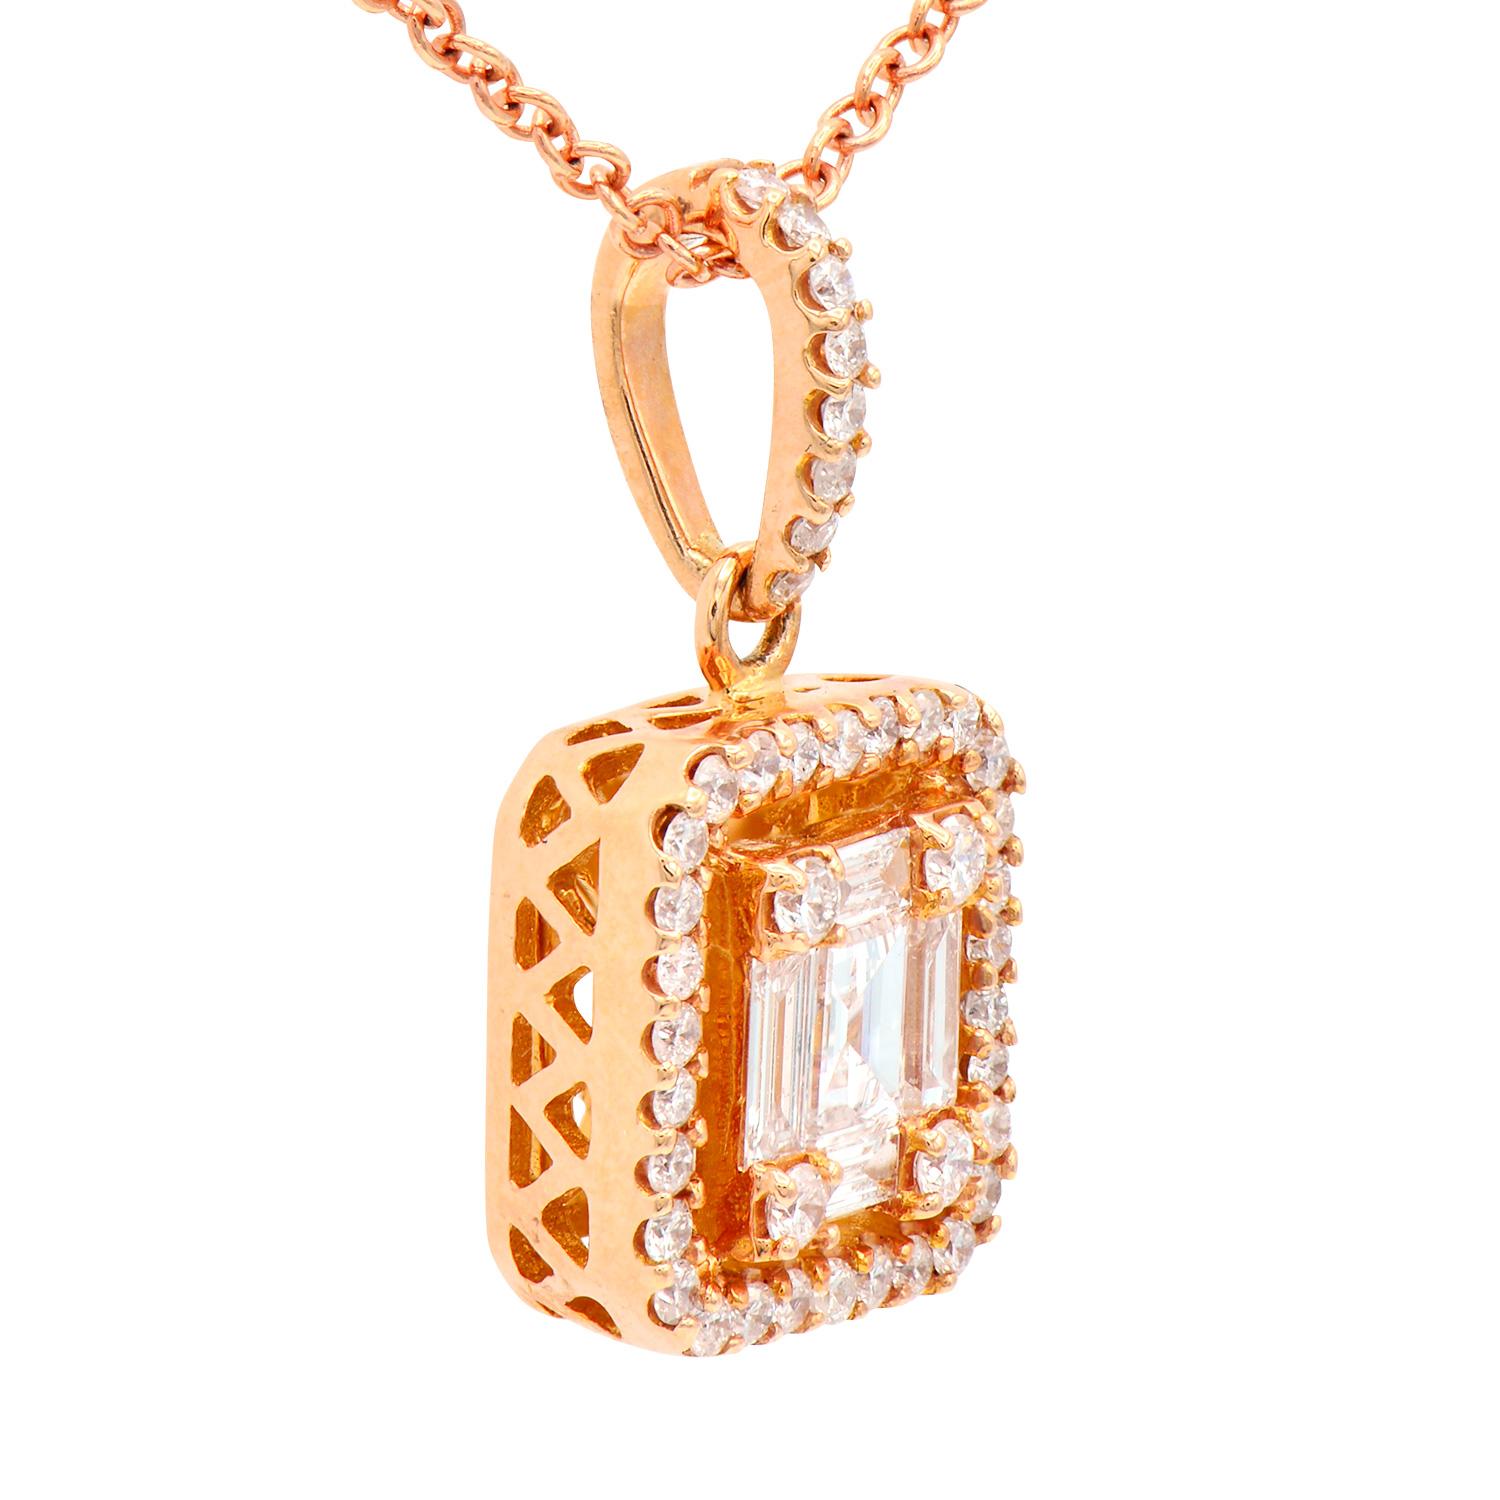 This unique and beautiful pendant looks like an emerald-cut diamond but is actually made of smaller diamonds to appear in an emerald shape. It is then surrounded by a round diamond halo and hung from a diamond-covered bail. There are 5 baguette